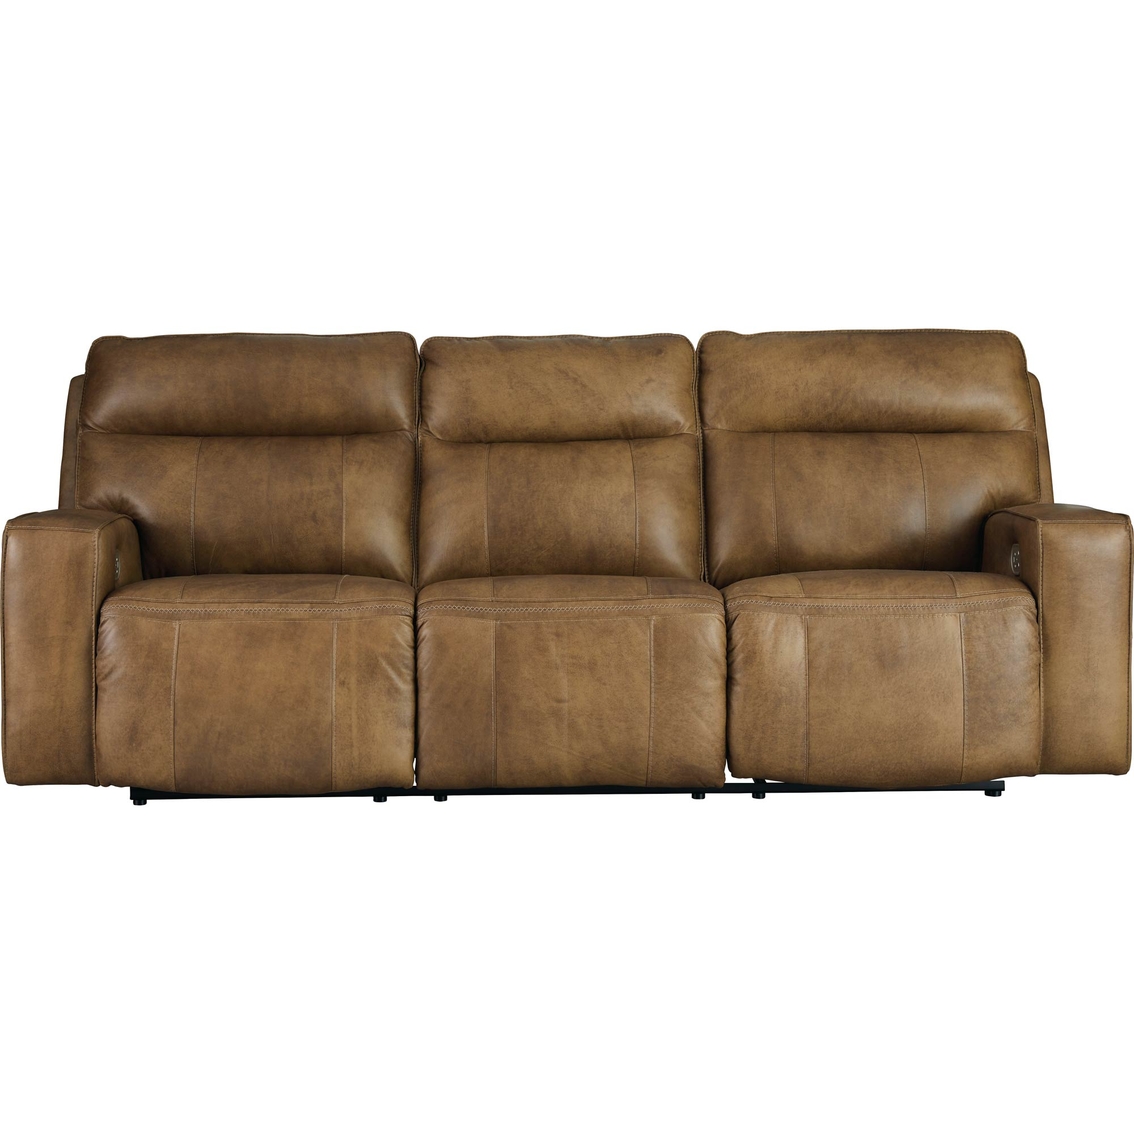 Signature Design by Ashley Game Plan Power Reclining Sofa - Image 2 of 8